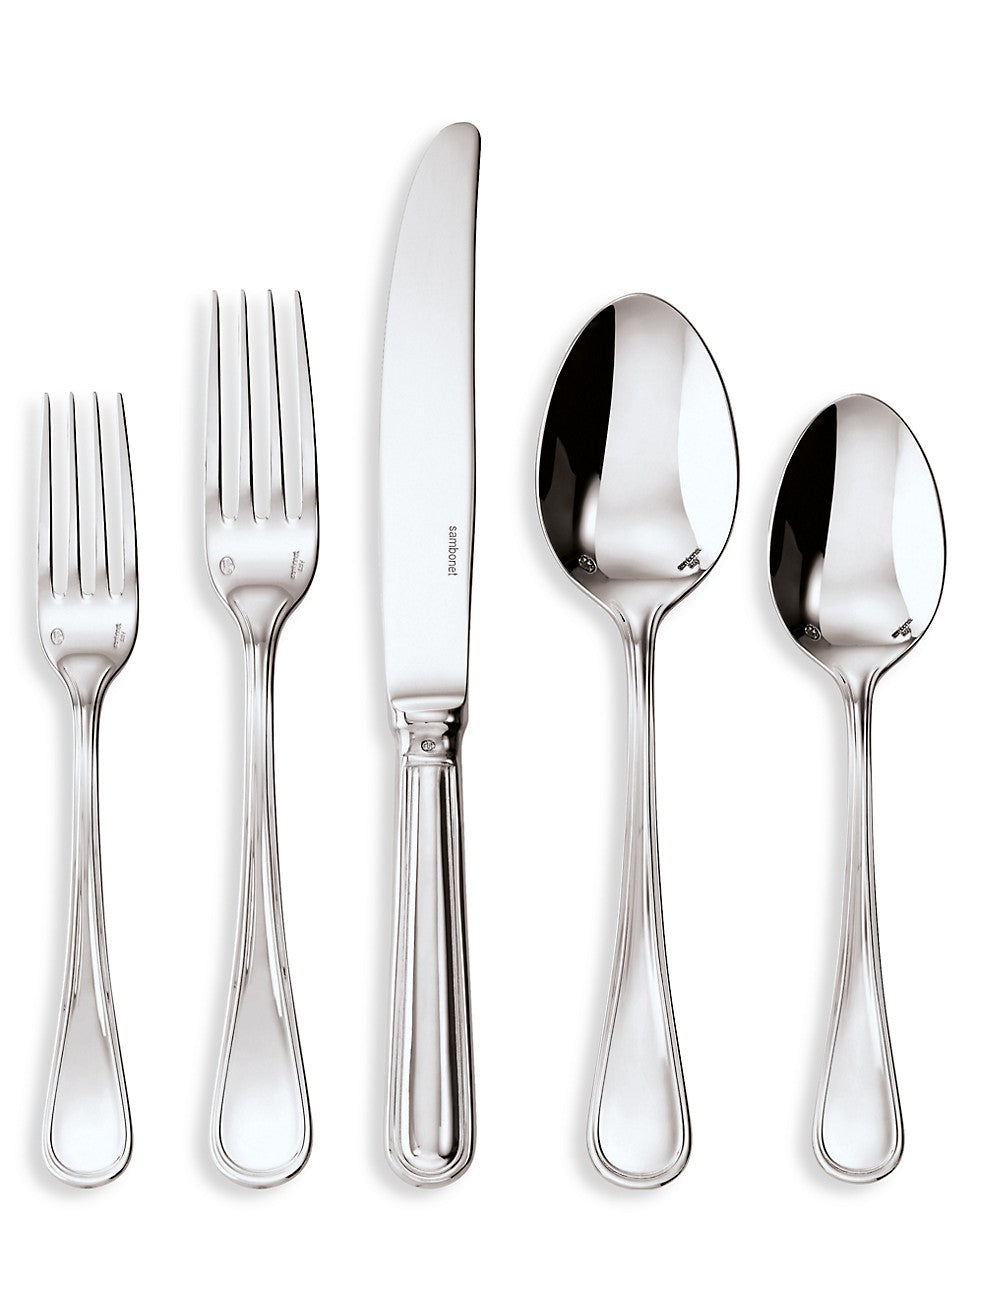 Sambonet Contour Solid Handle Flatware 5 pc Place Setting, 18/10 Stainless Steel